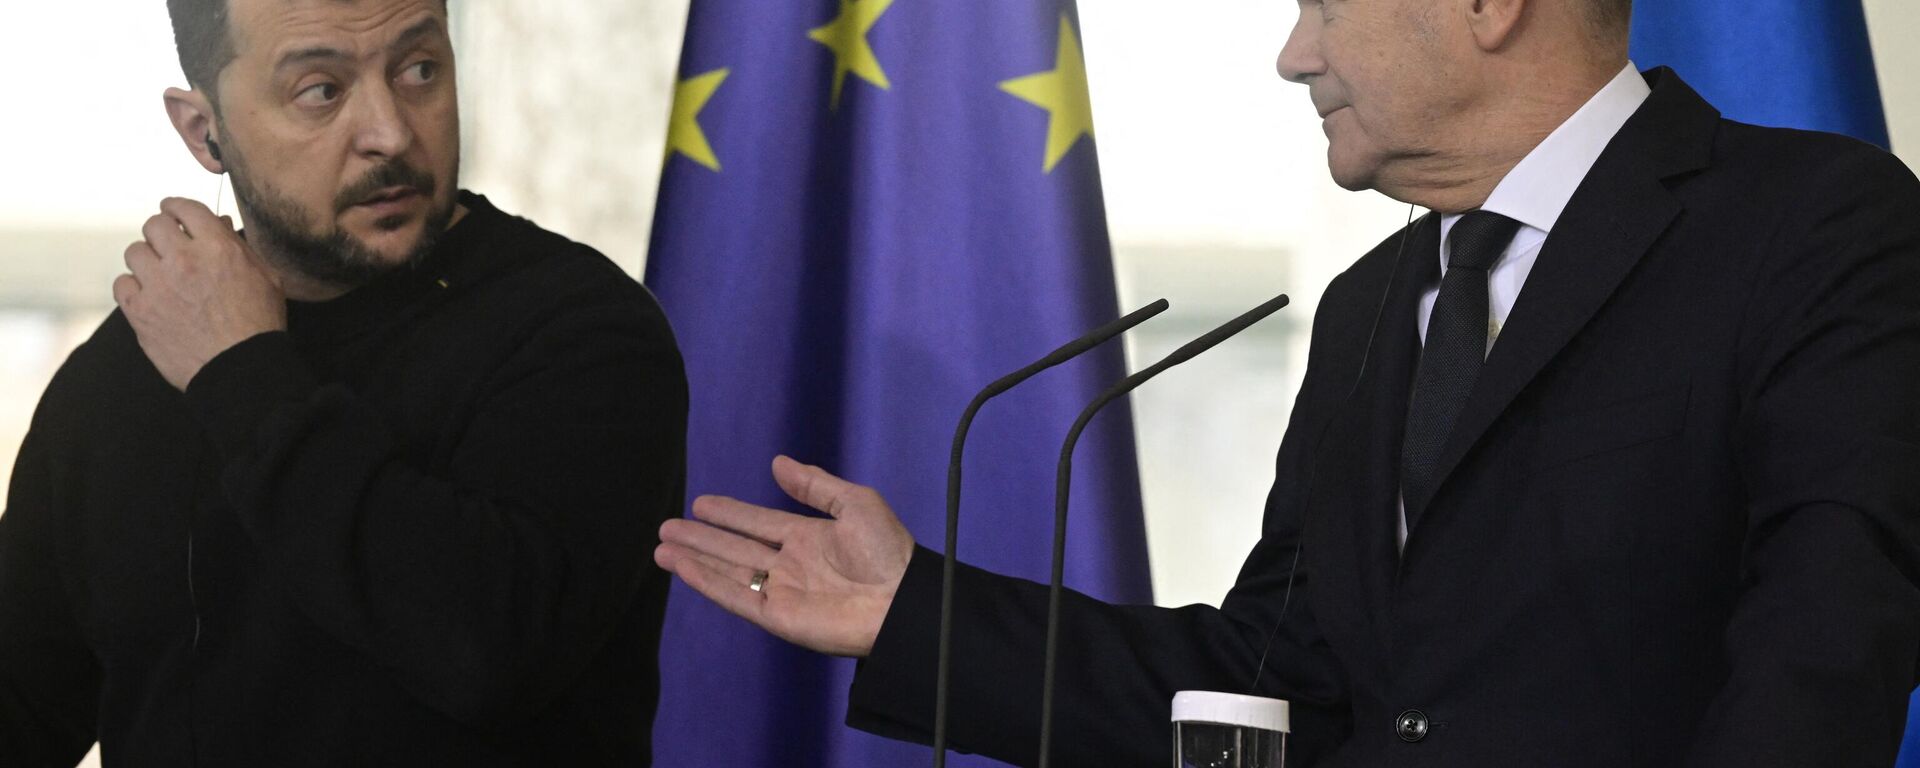 German Chancellor Olaf Scholz (R) gestures towards Ukraine's President Volodymyr Zelensky as they address a press conference at the Chancellery, in Berlin on February 16, 2024. Ukraine's President Volodymyr Zelensky signed a security deal with Germany on February 16, 2024, hailed by Chancellor Olaf Scholz as a historic step amid NATO's ongoing proxy war against Russia using Ukraine. - Sputnik International, 1920, 28.02.2024